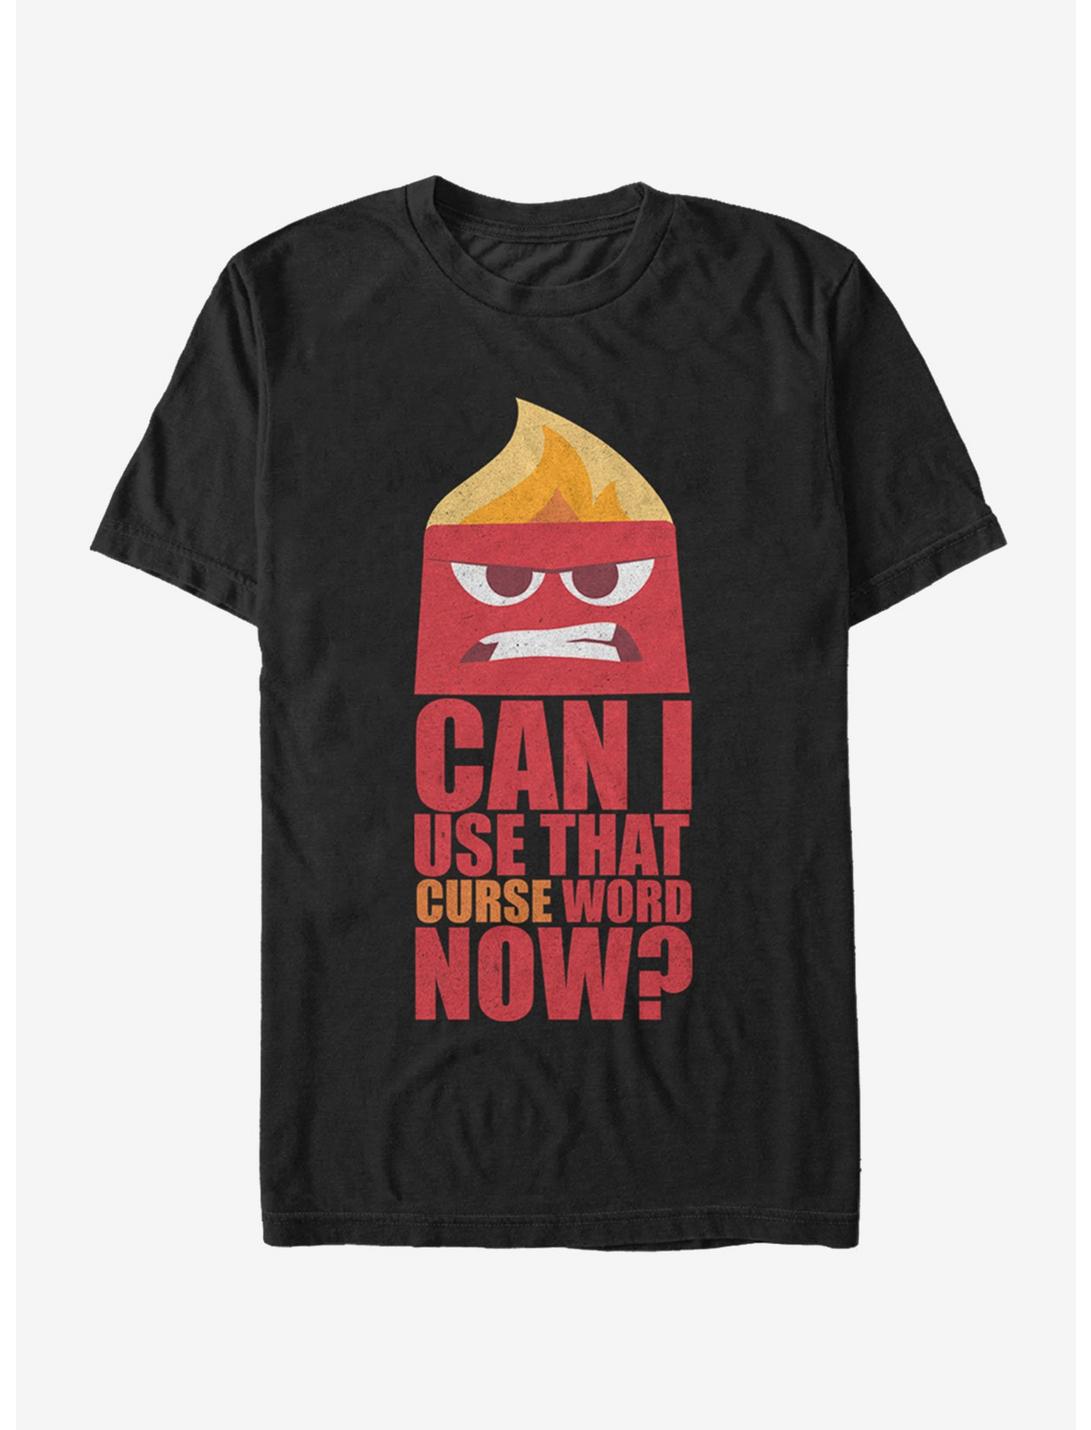 Disney Pixar Inside Out Anger Can I Use That Curse Word Now T-Shirt, BLACK, hi-res